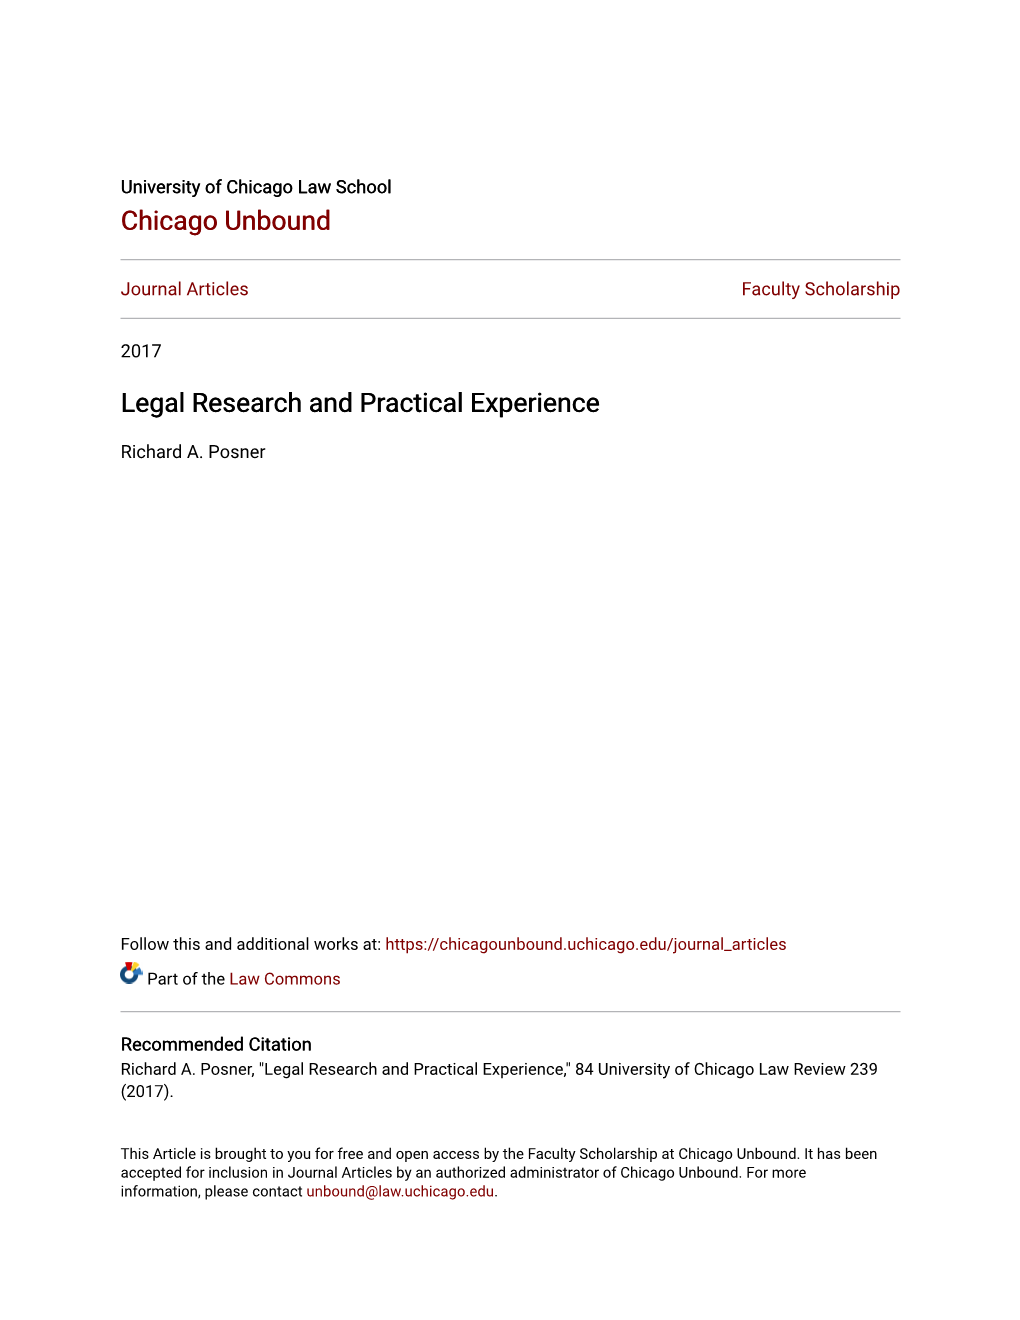 Legal Research and Practical Experience